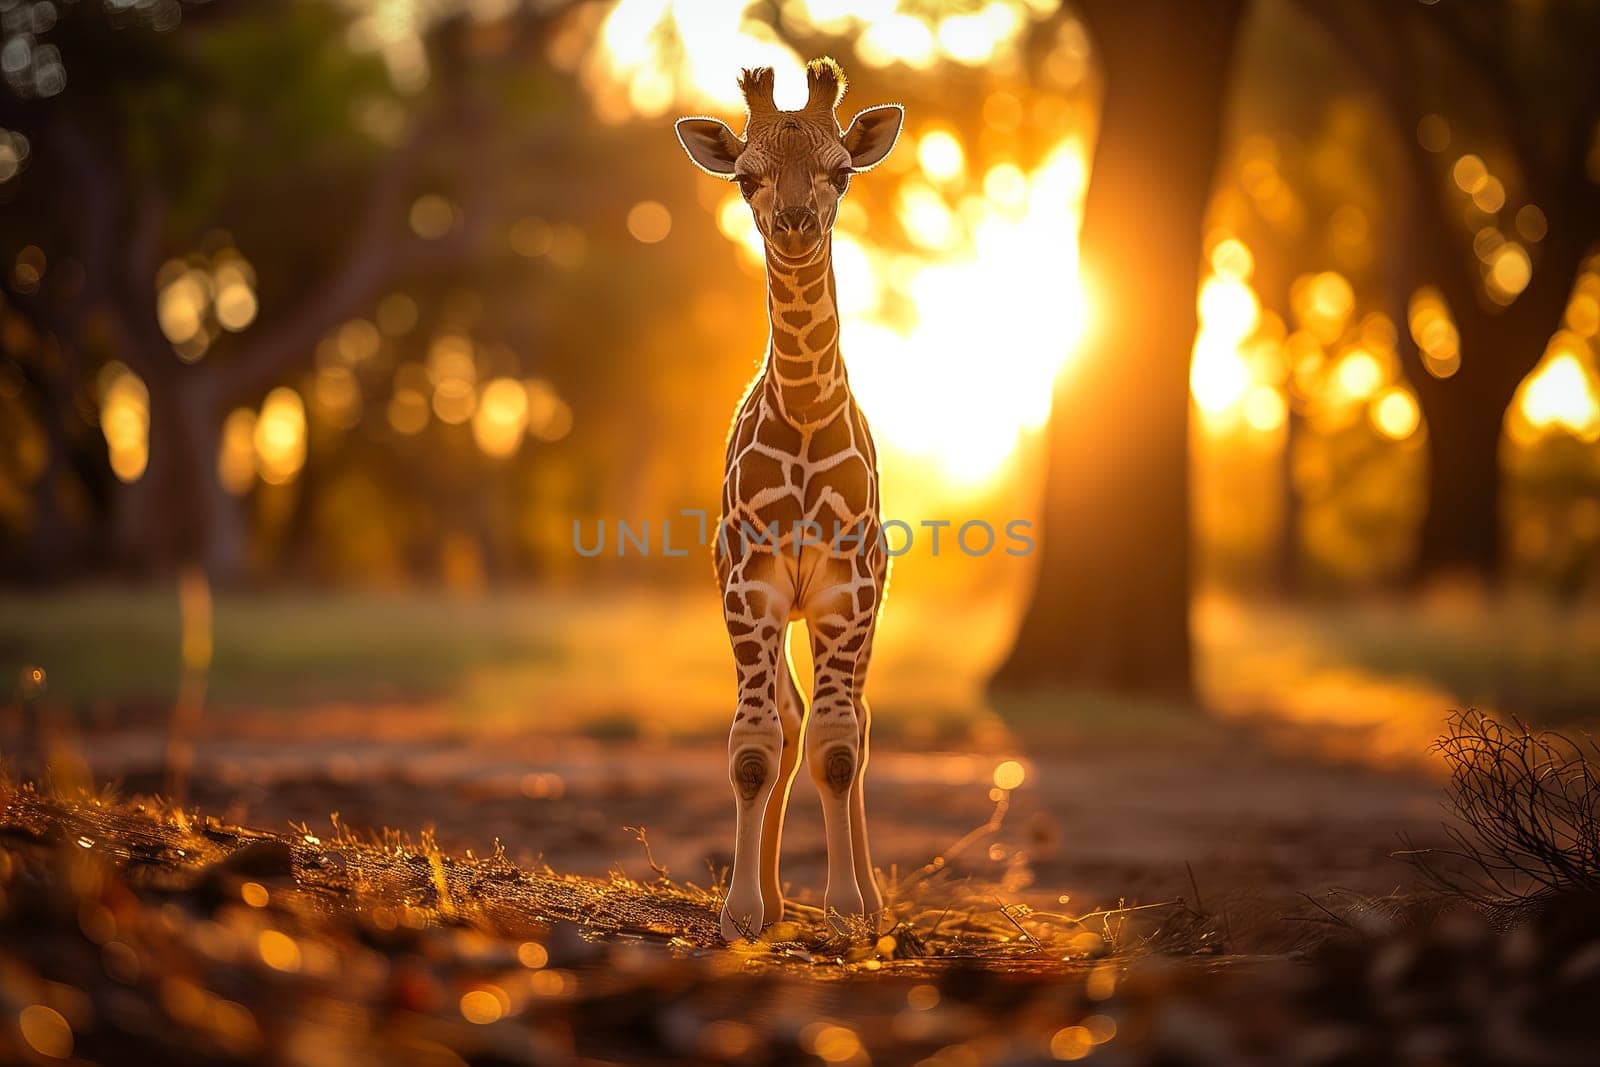 Baby giraffe standing amidst the golden rays of the setting sun, surrounded by nature beauty